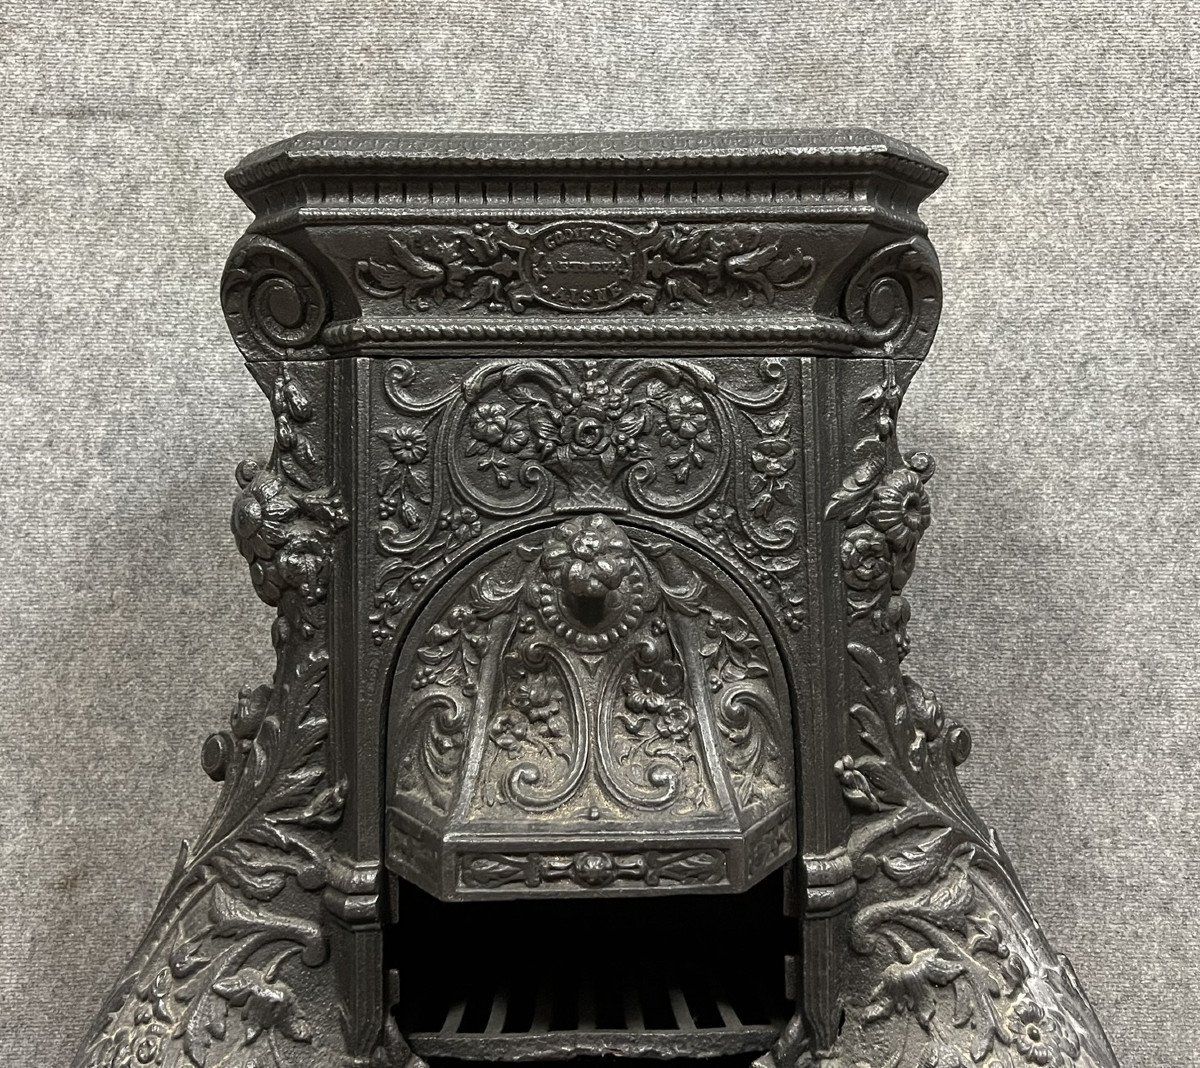 Fireplace Stove From Godin Foundries And Manufactures Napoleon III Period -photo-4